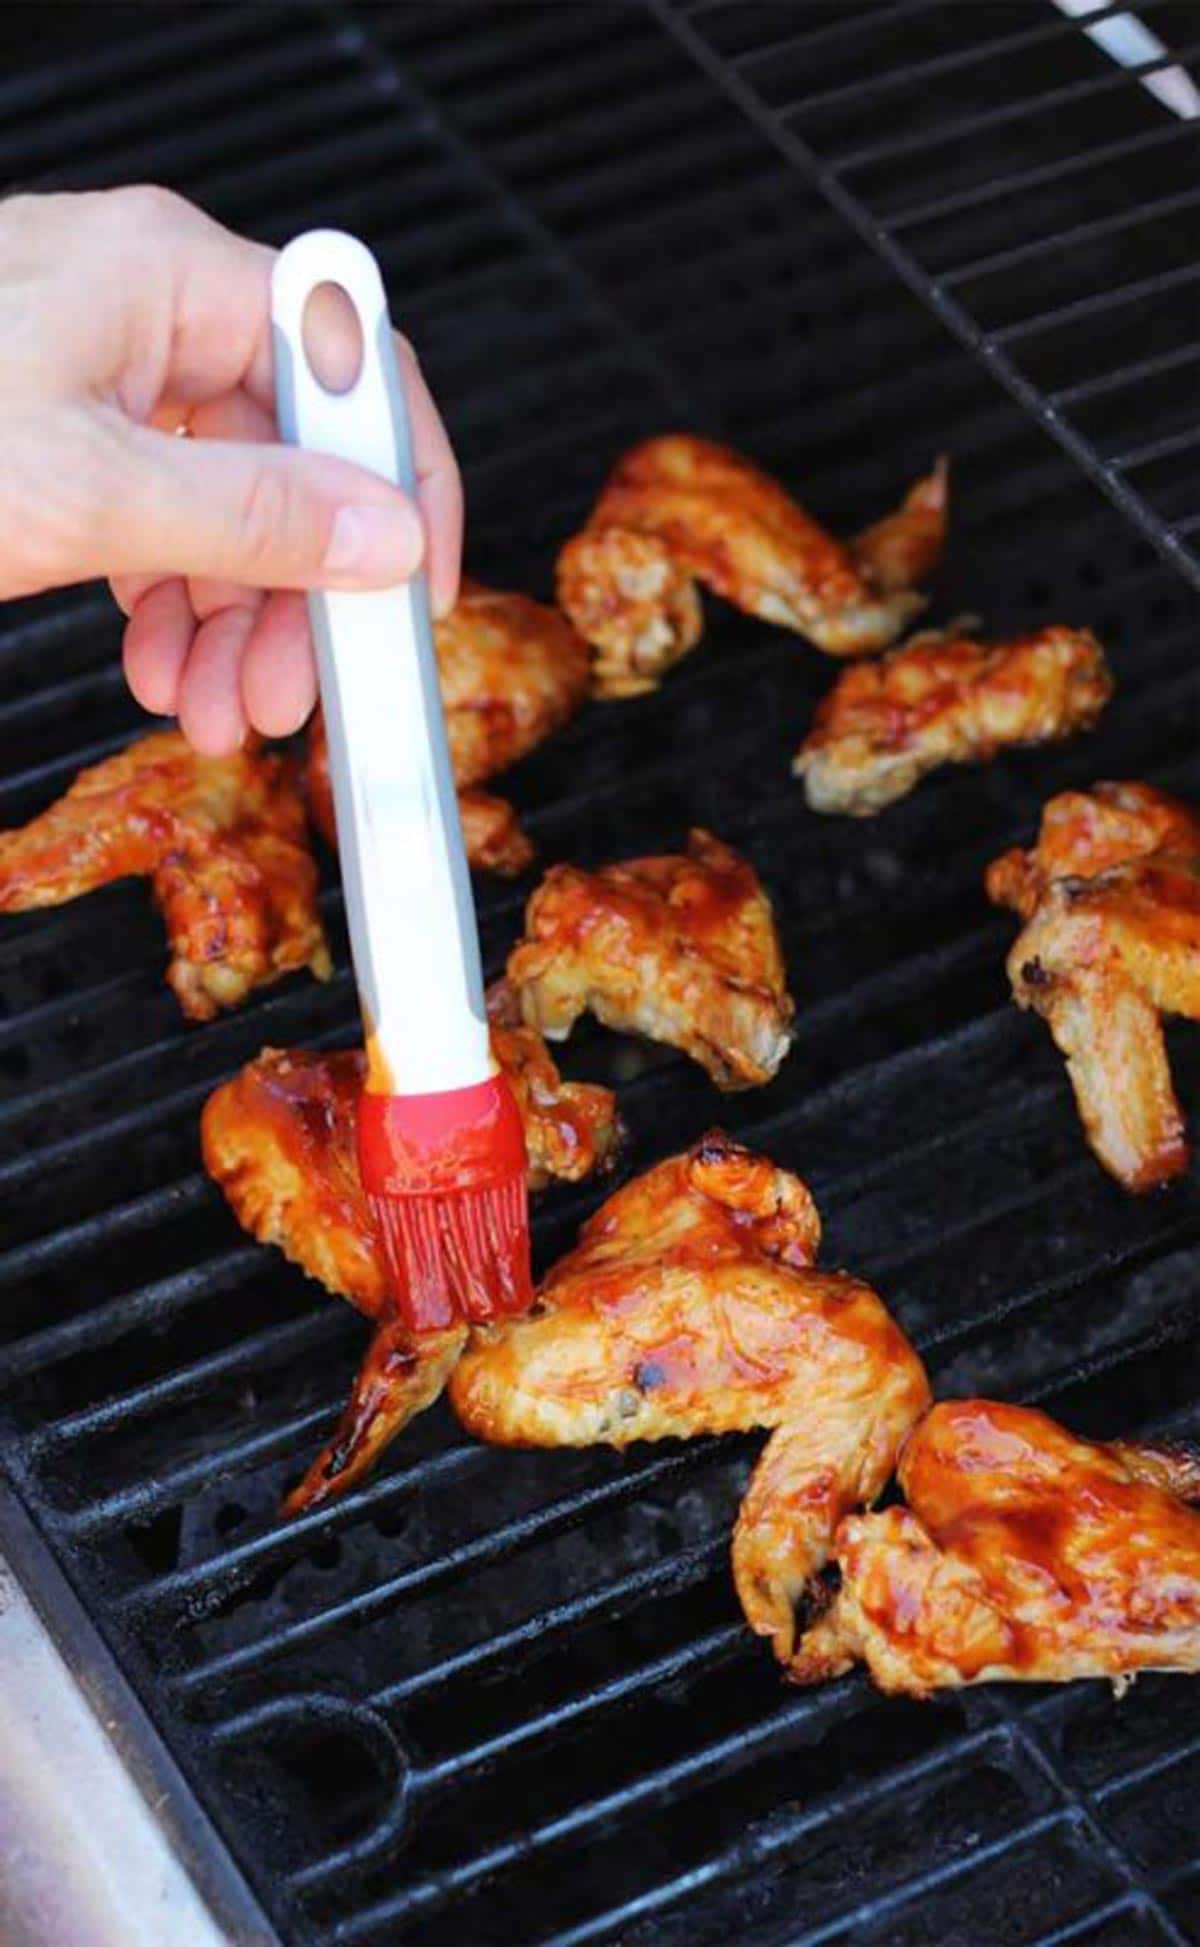 9 BBQ Chicken Wings on a grill, hand brushing BBQ sauce on a chicken wing while grilling.